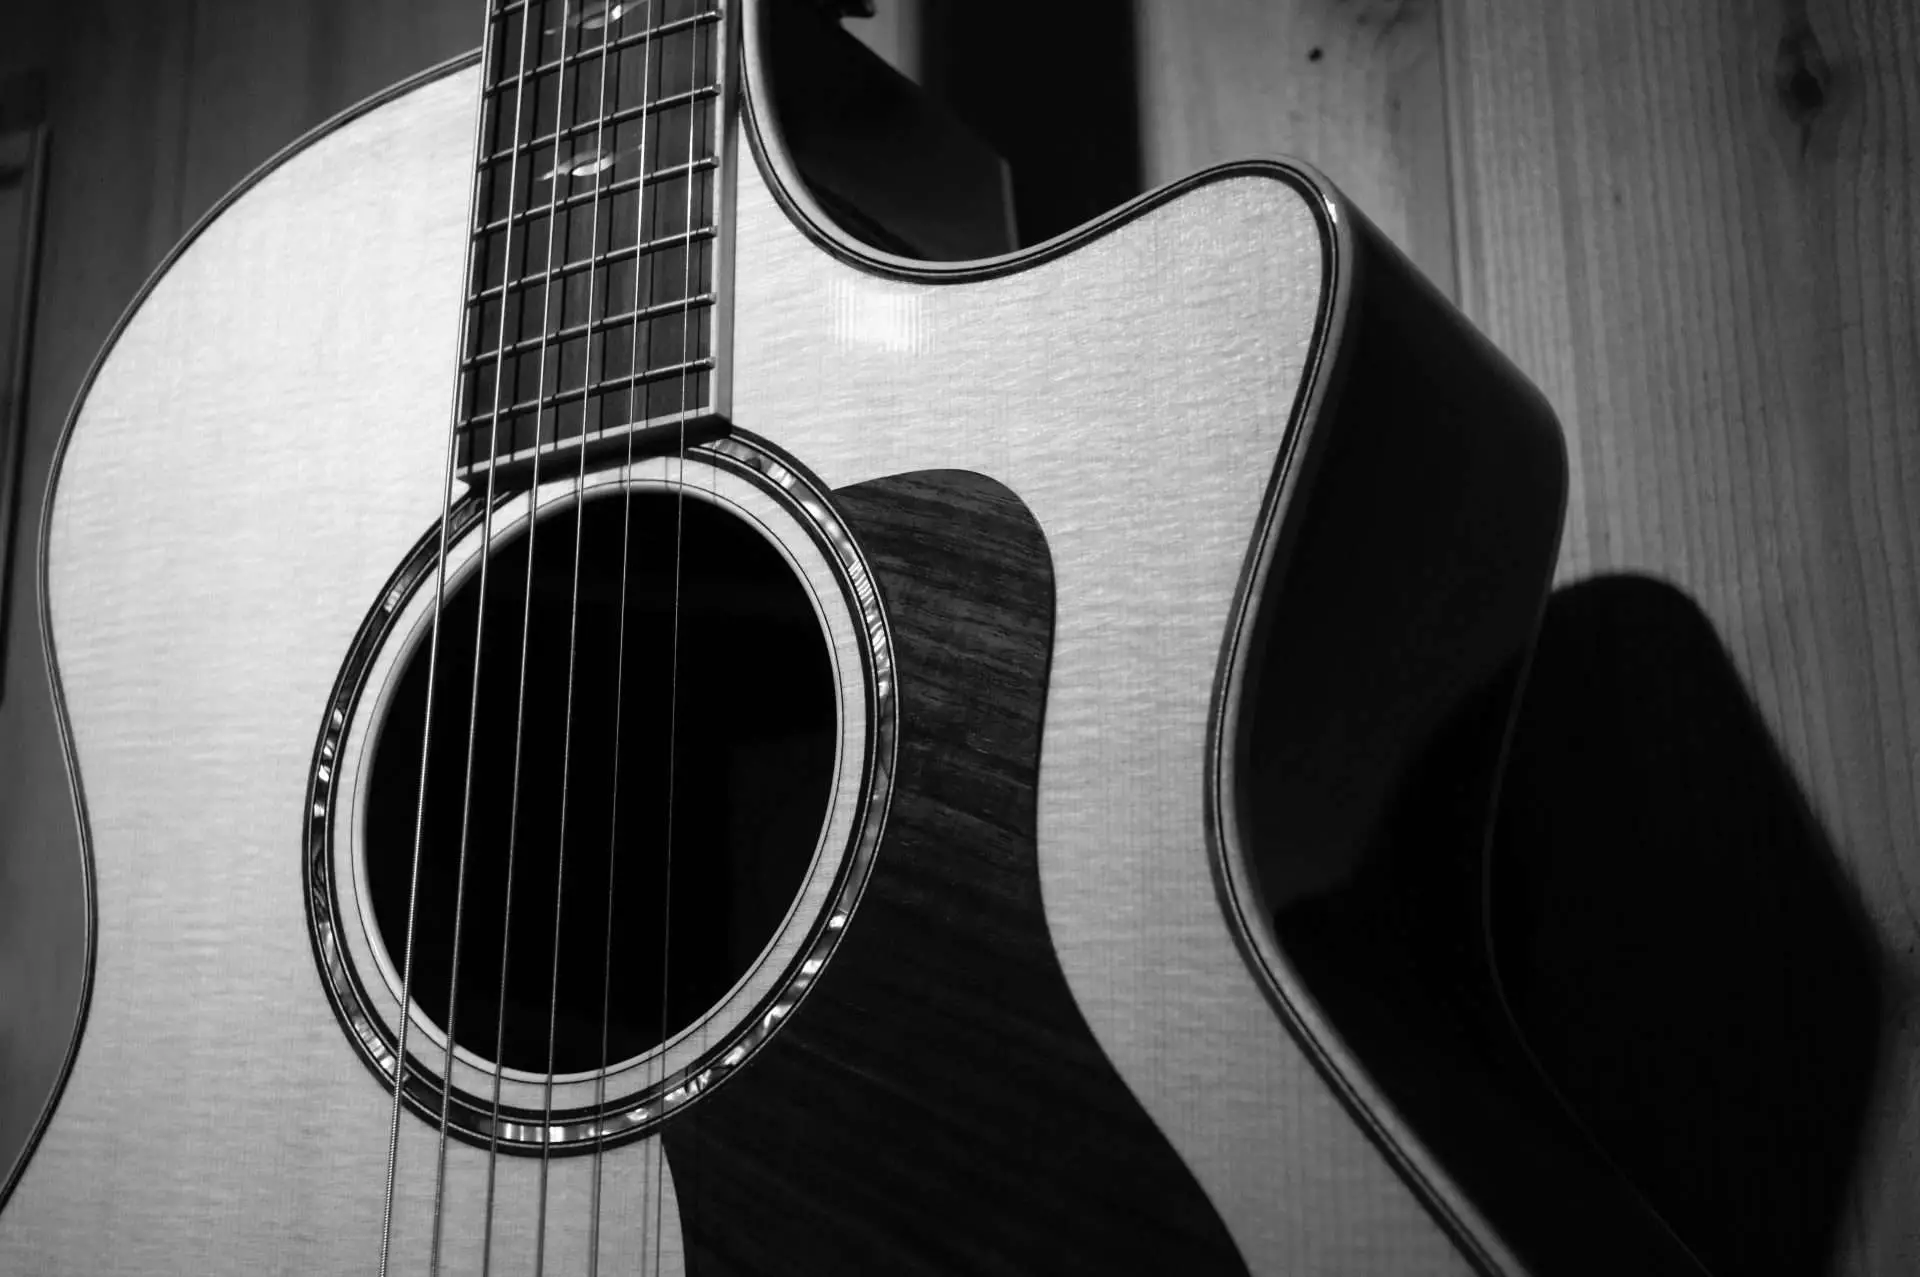 songs for the acoustic guitar, best acoustic guitar songs, acoustic guitar solos, beautiful acoustic guitar songs